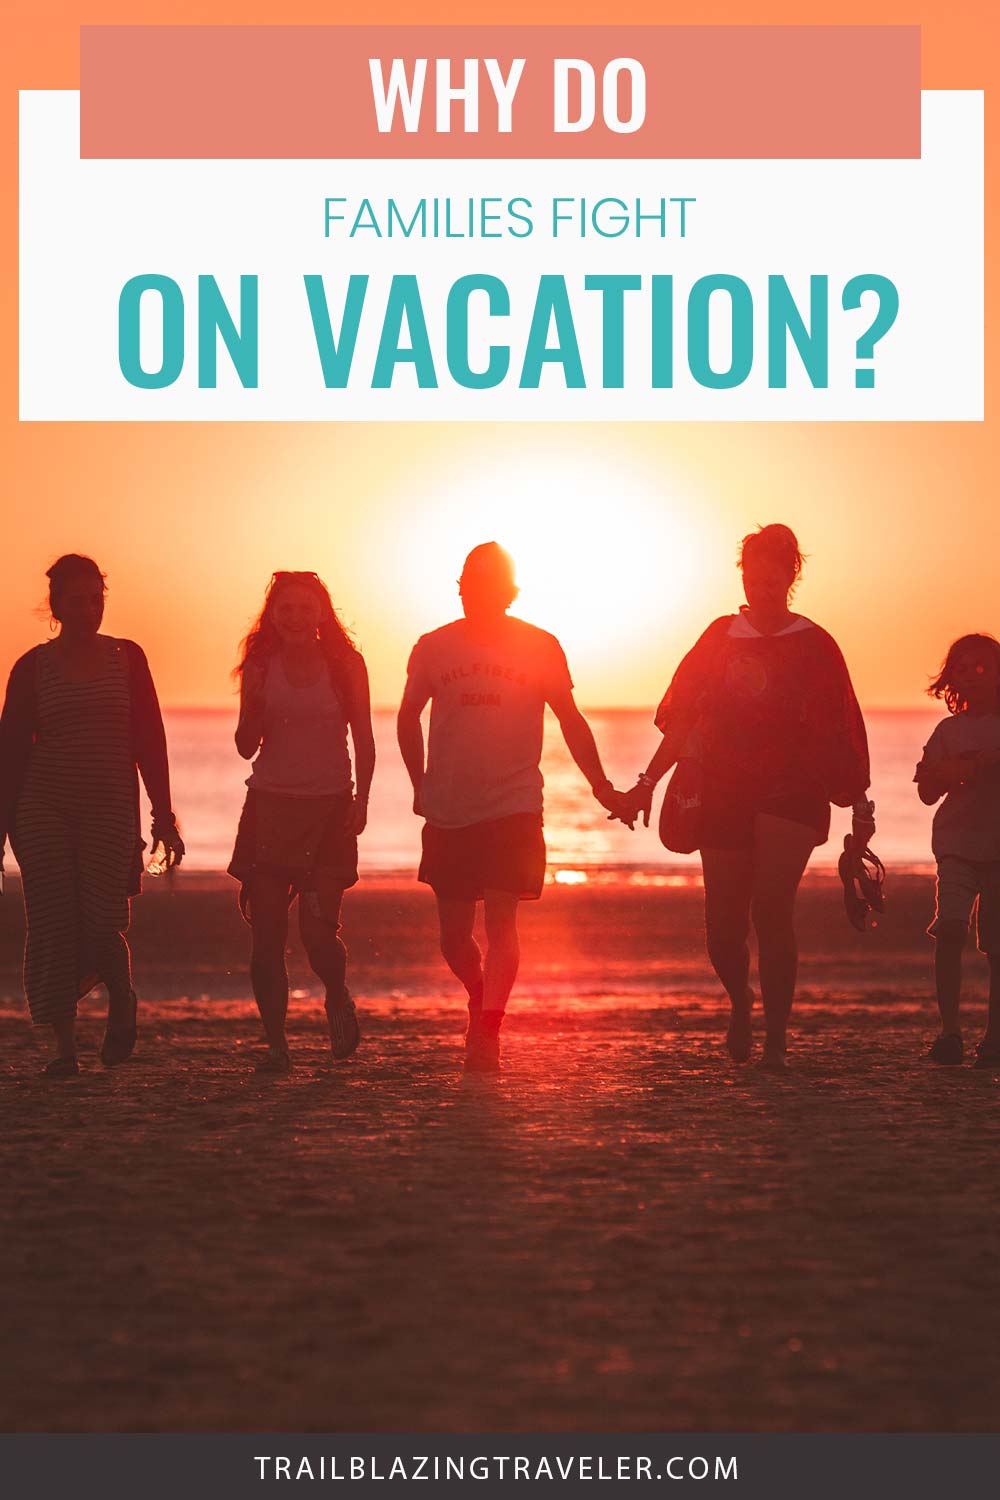 Why do Families Fight on Vacation?